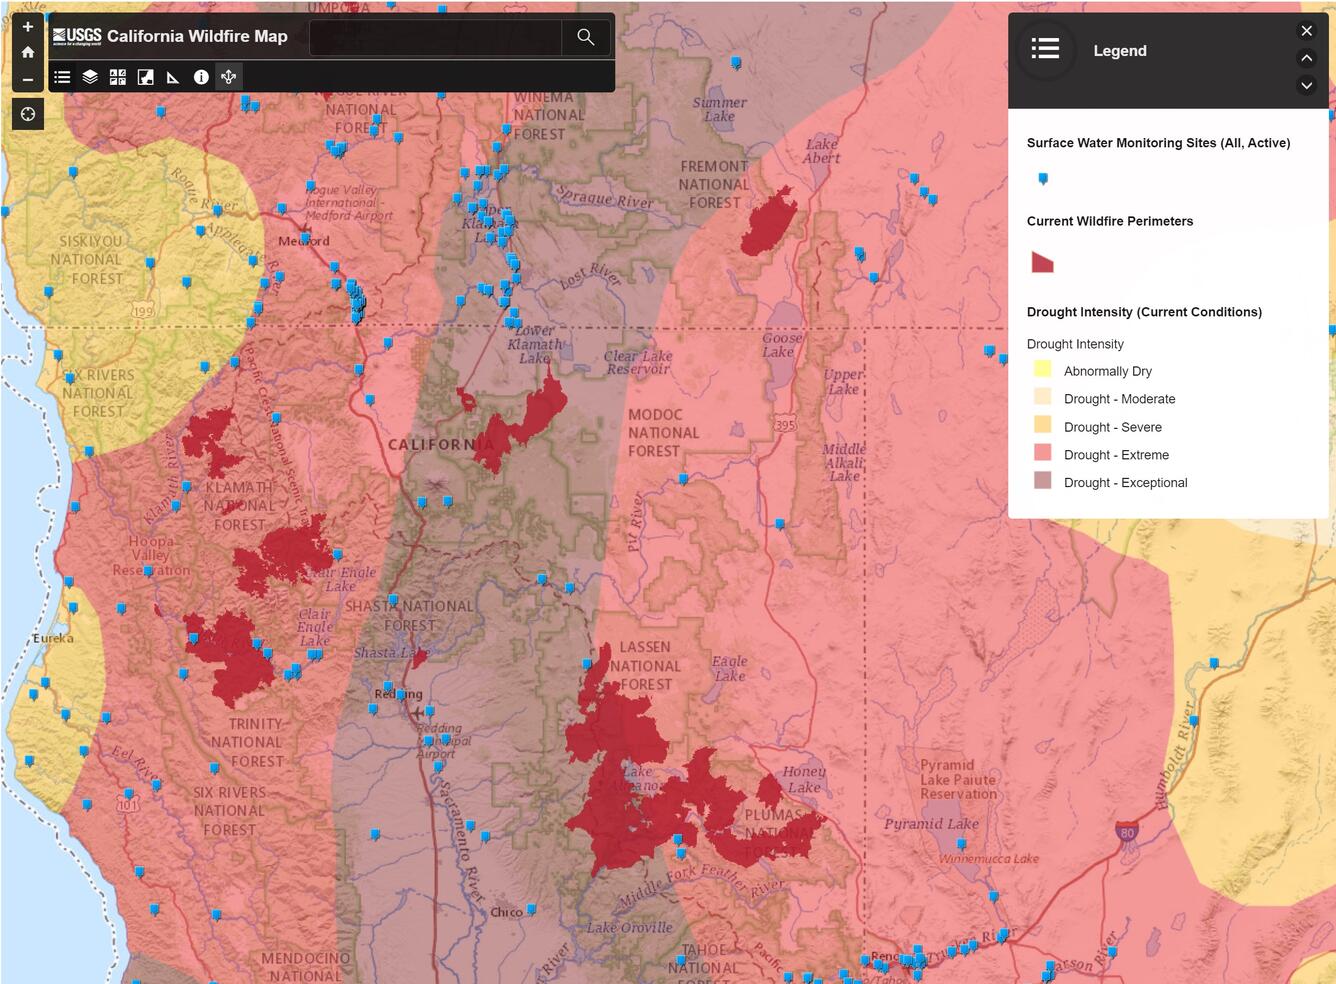 screenshot of mapping application showing drought intensity shaded in red to yellow, wildfire perimeters in brick red